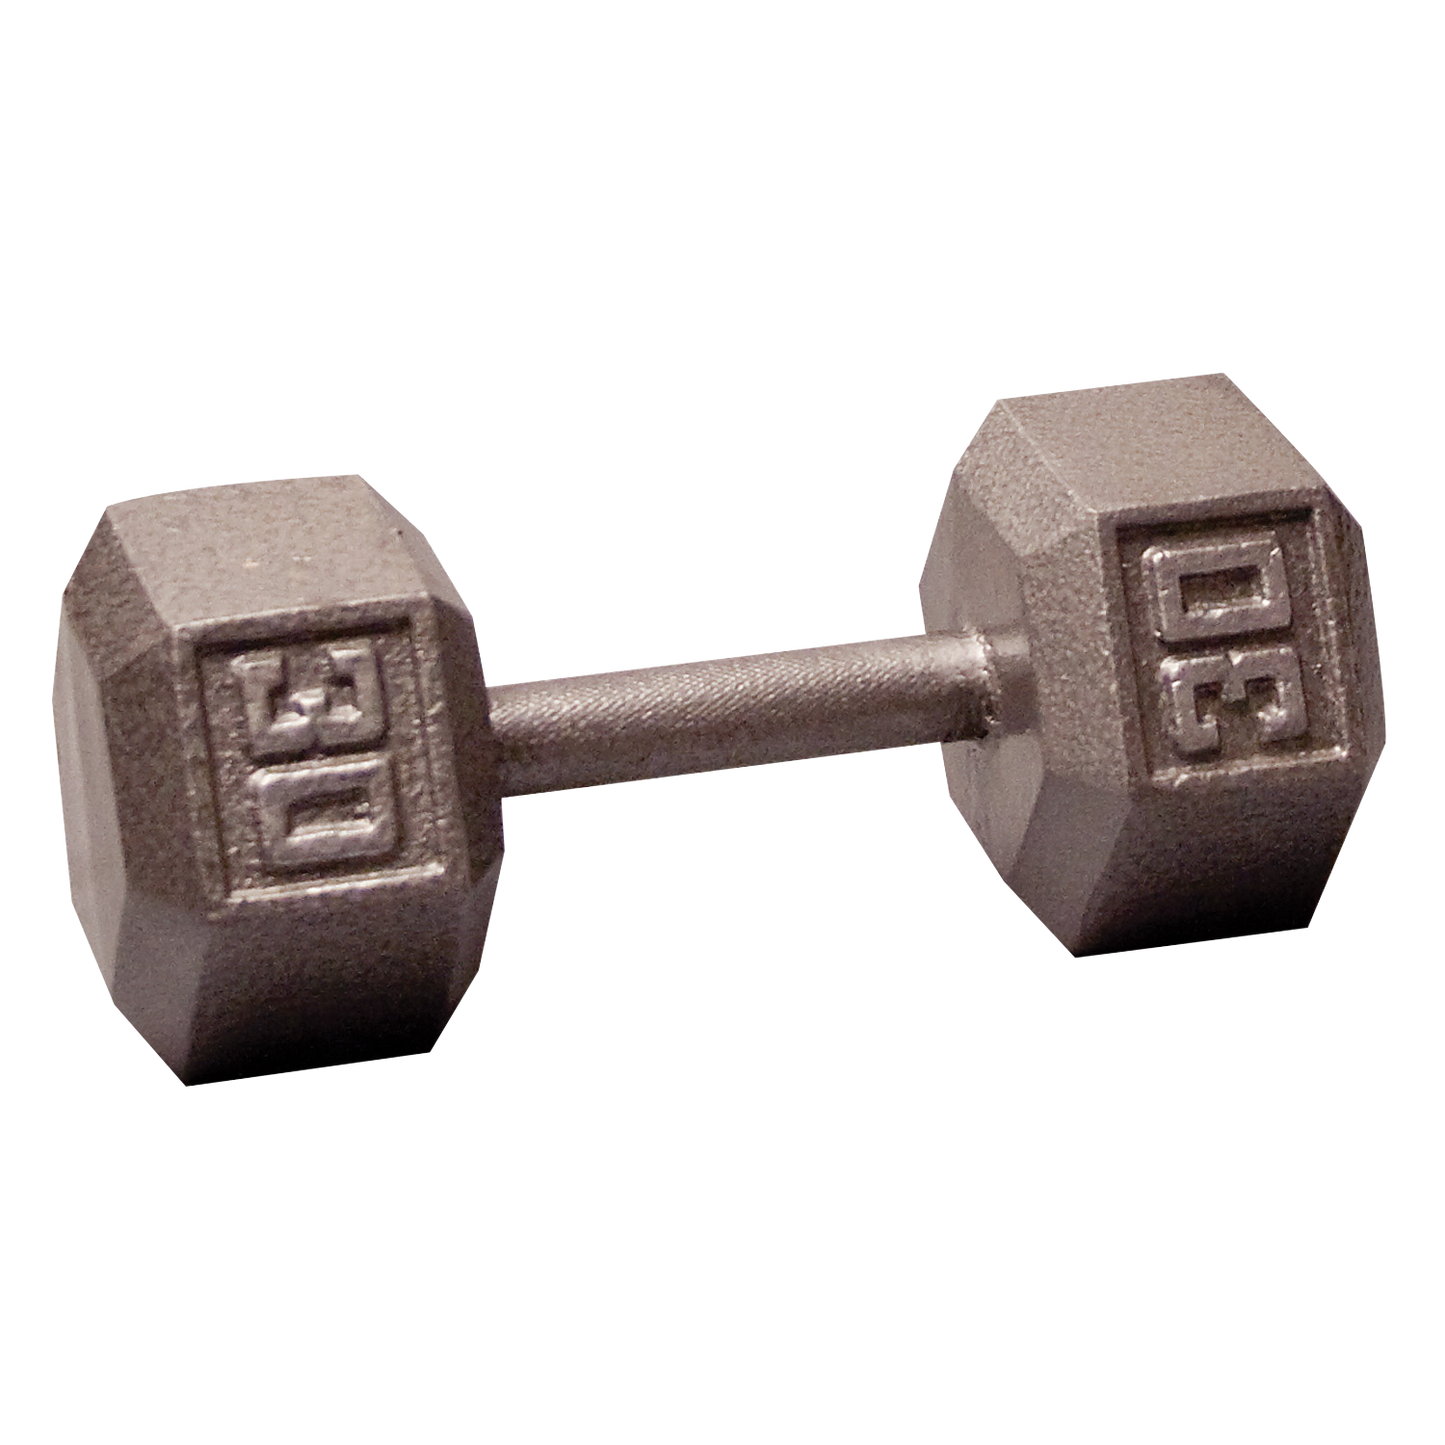 Body-Solid Cast Iron Hex Dumbbells